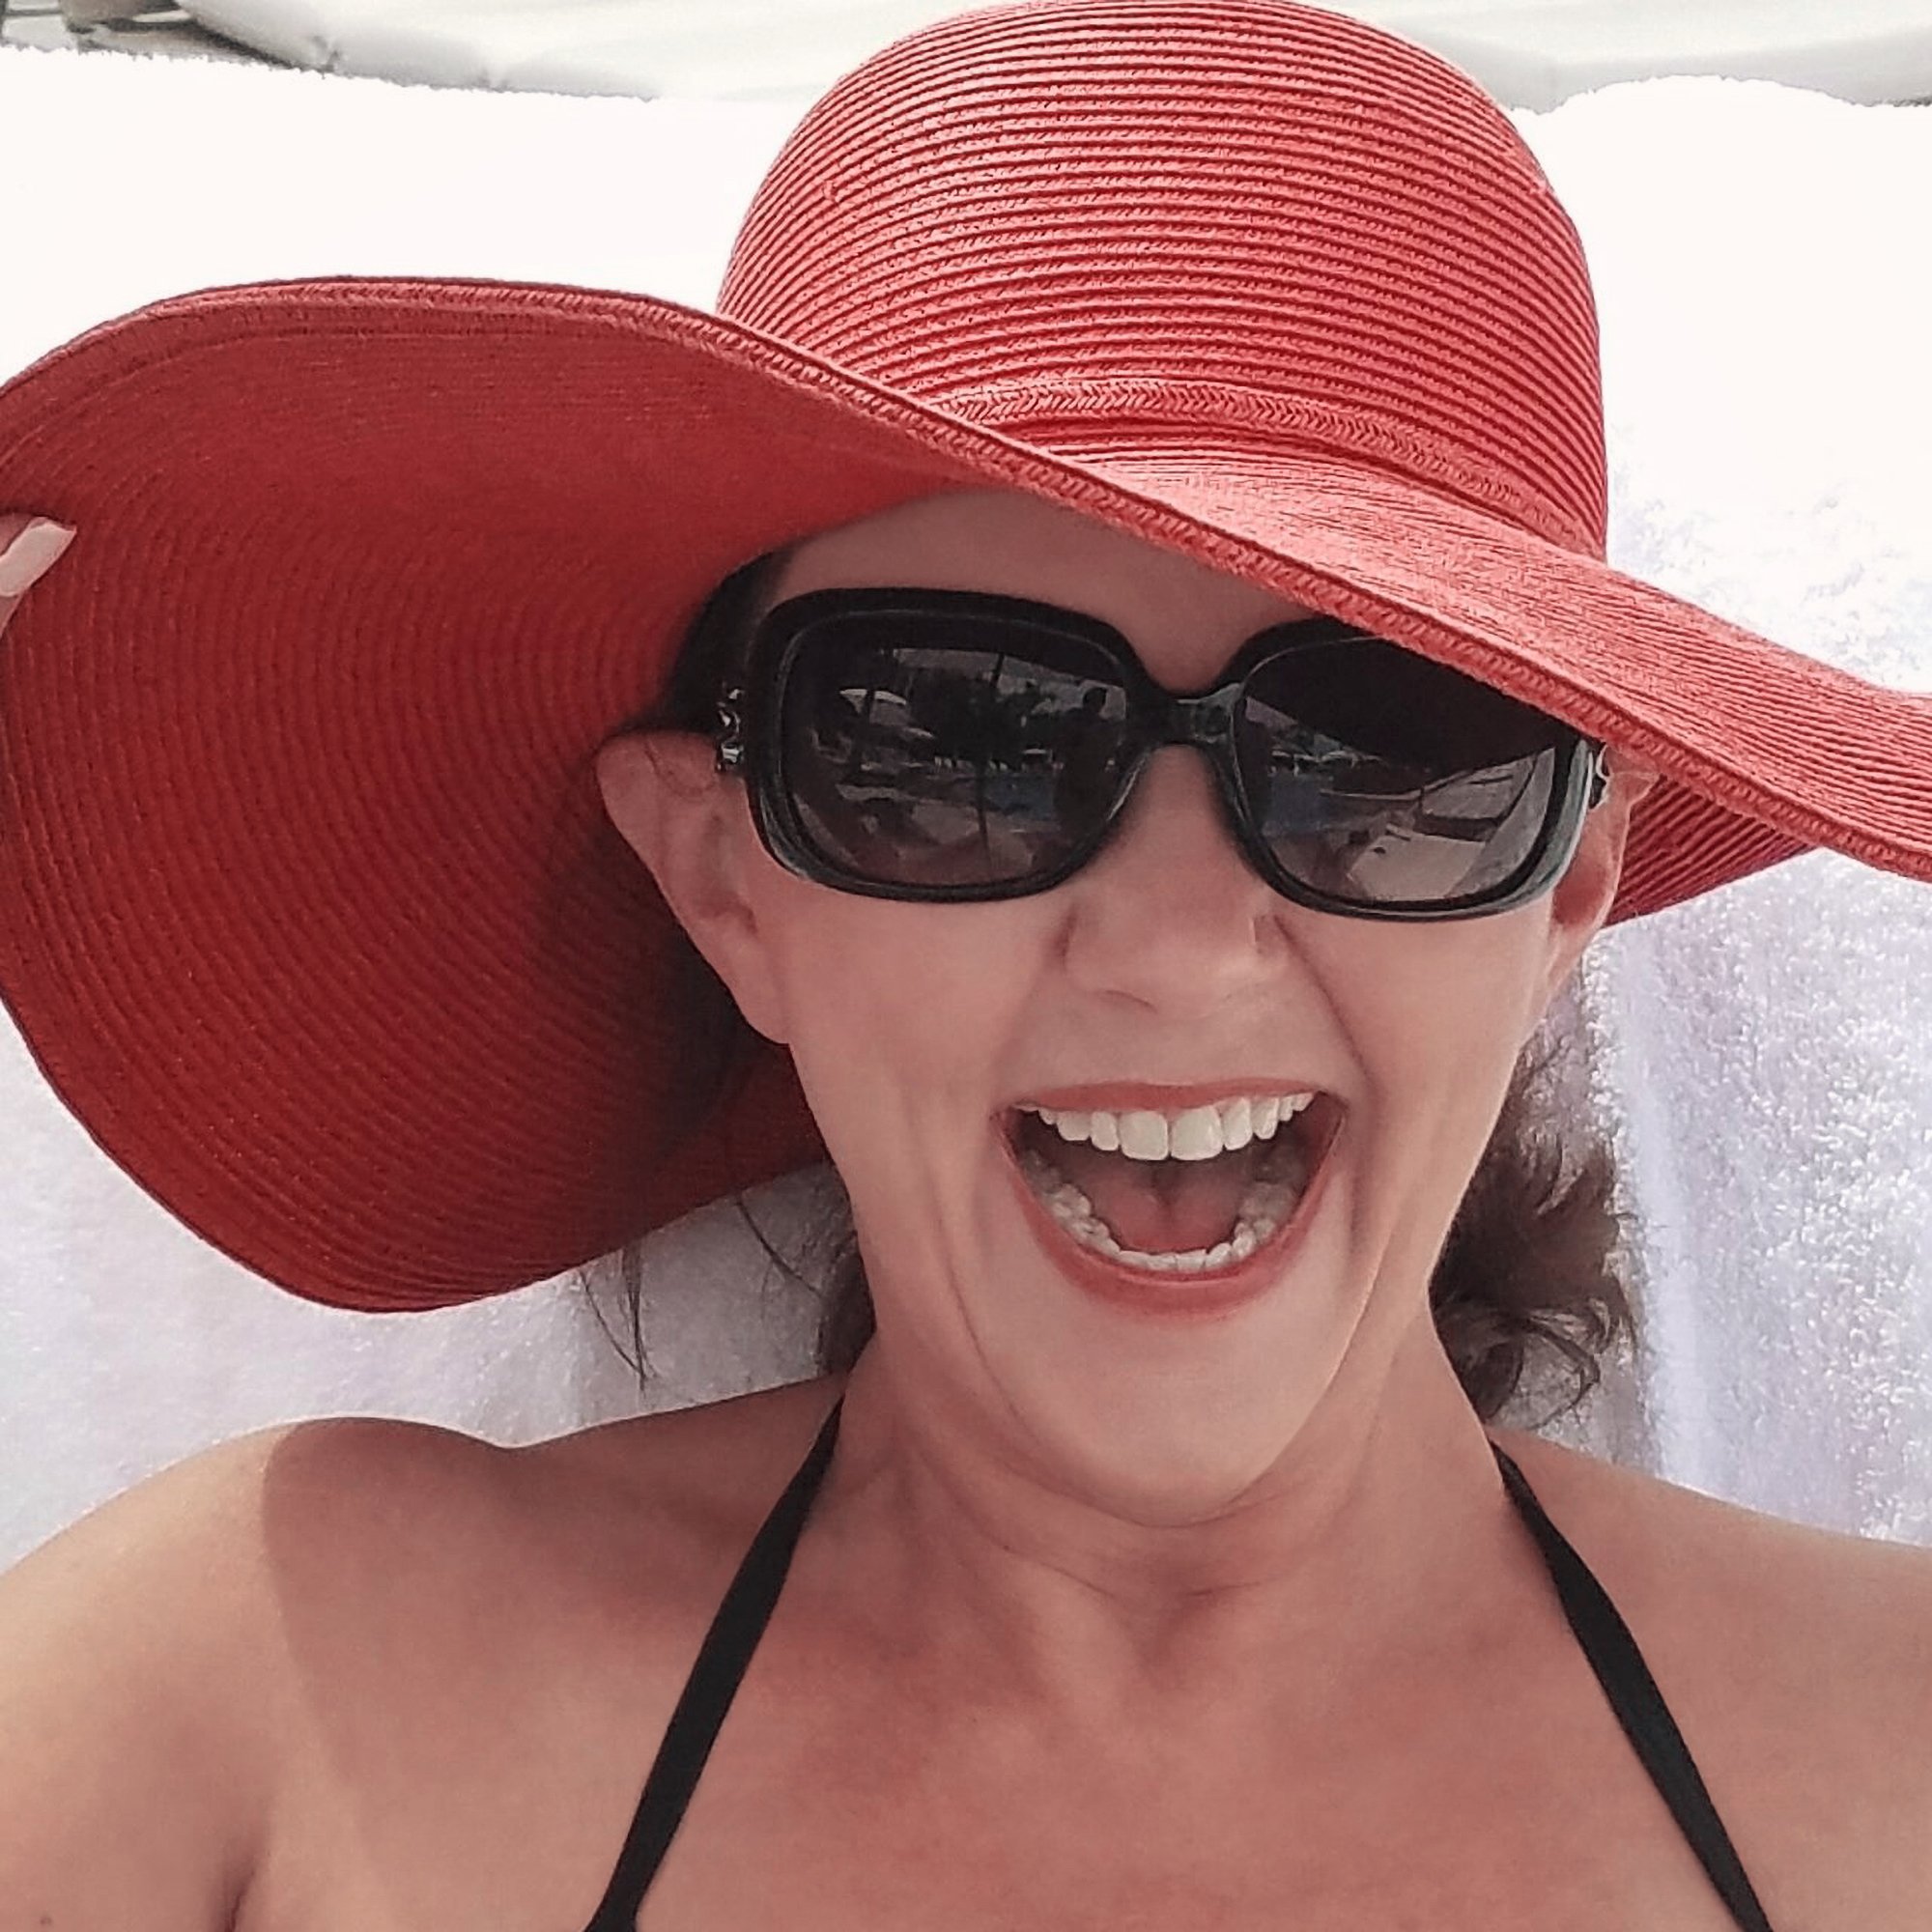 red hat at the ritz caymans.jpg